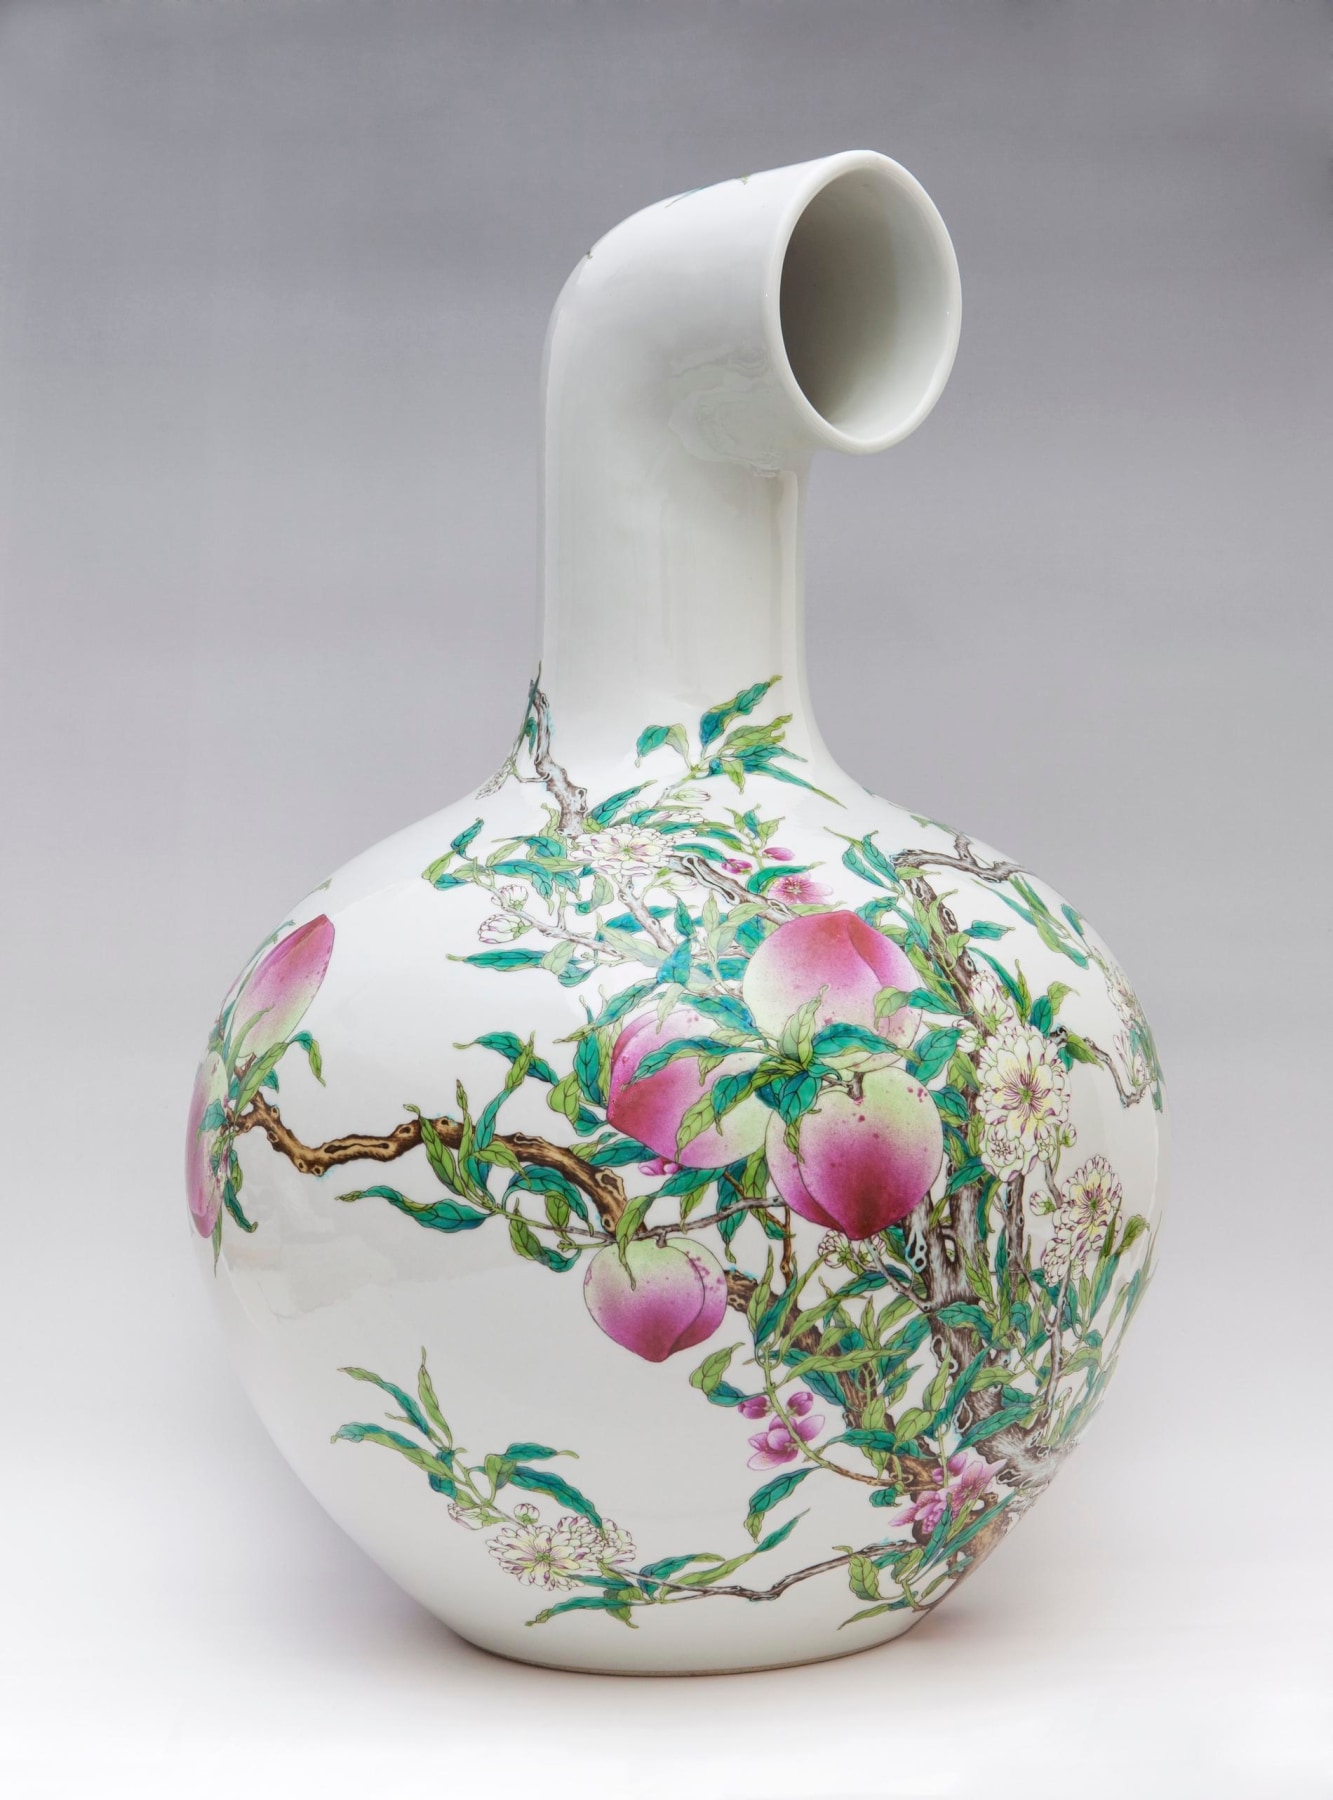 A white, long necked vase, with a peach tree painting on the body